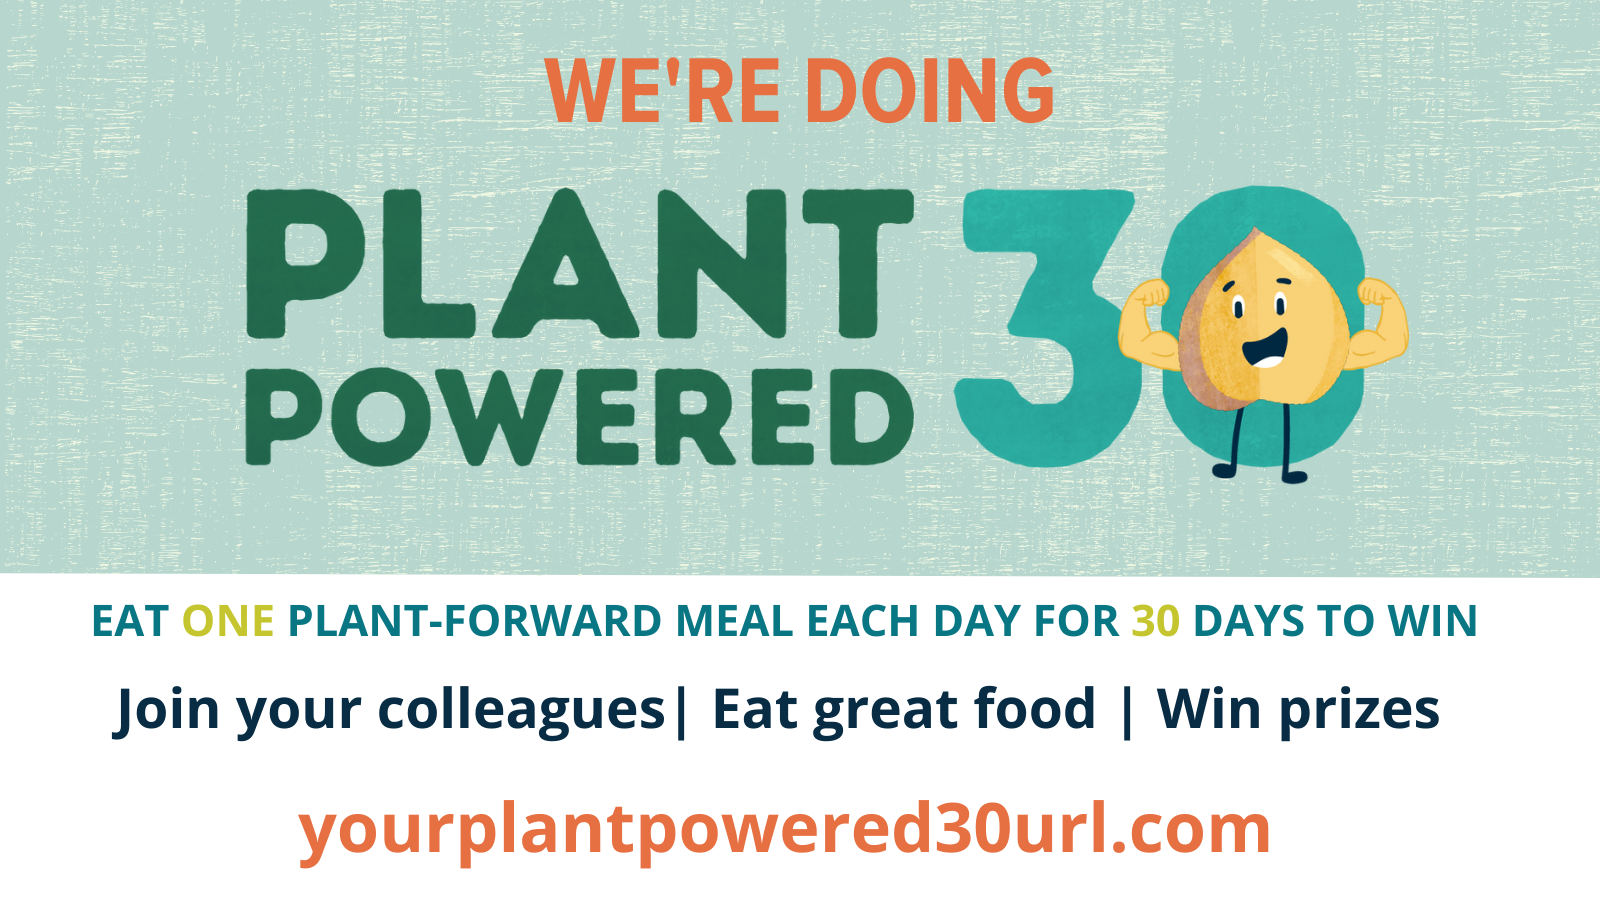 Plant Powered 30 Twitter image 1